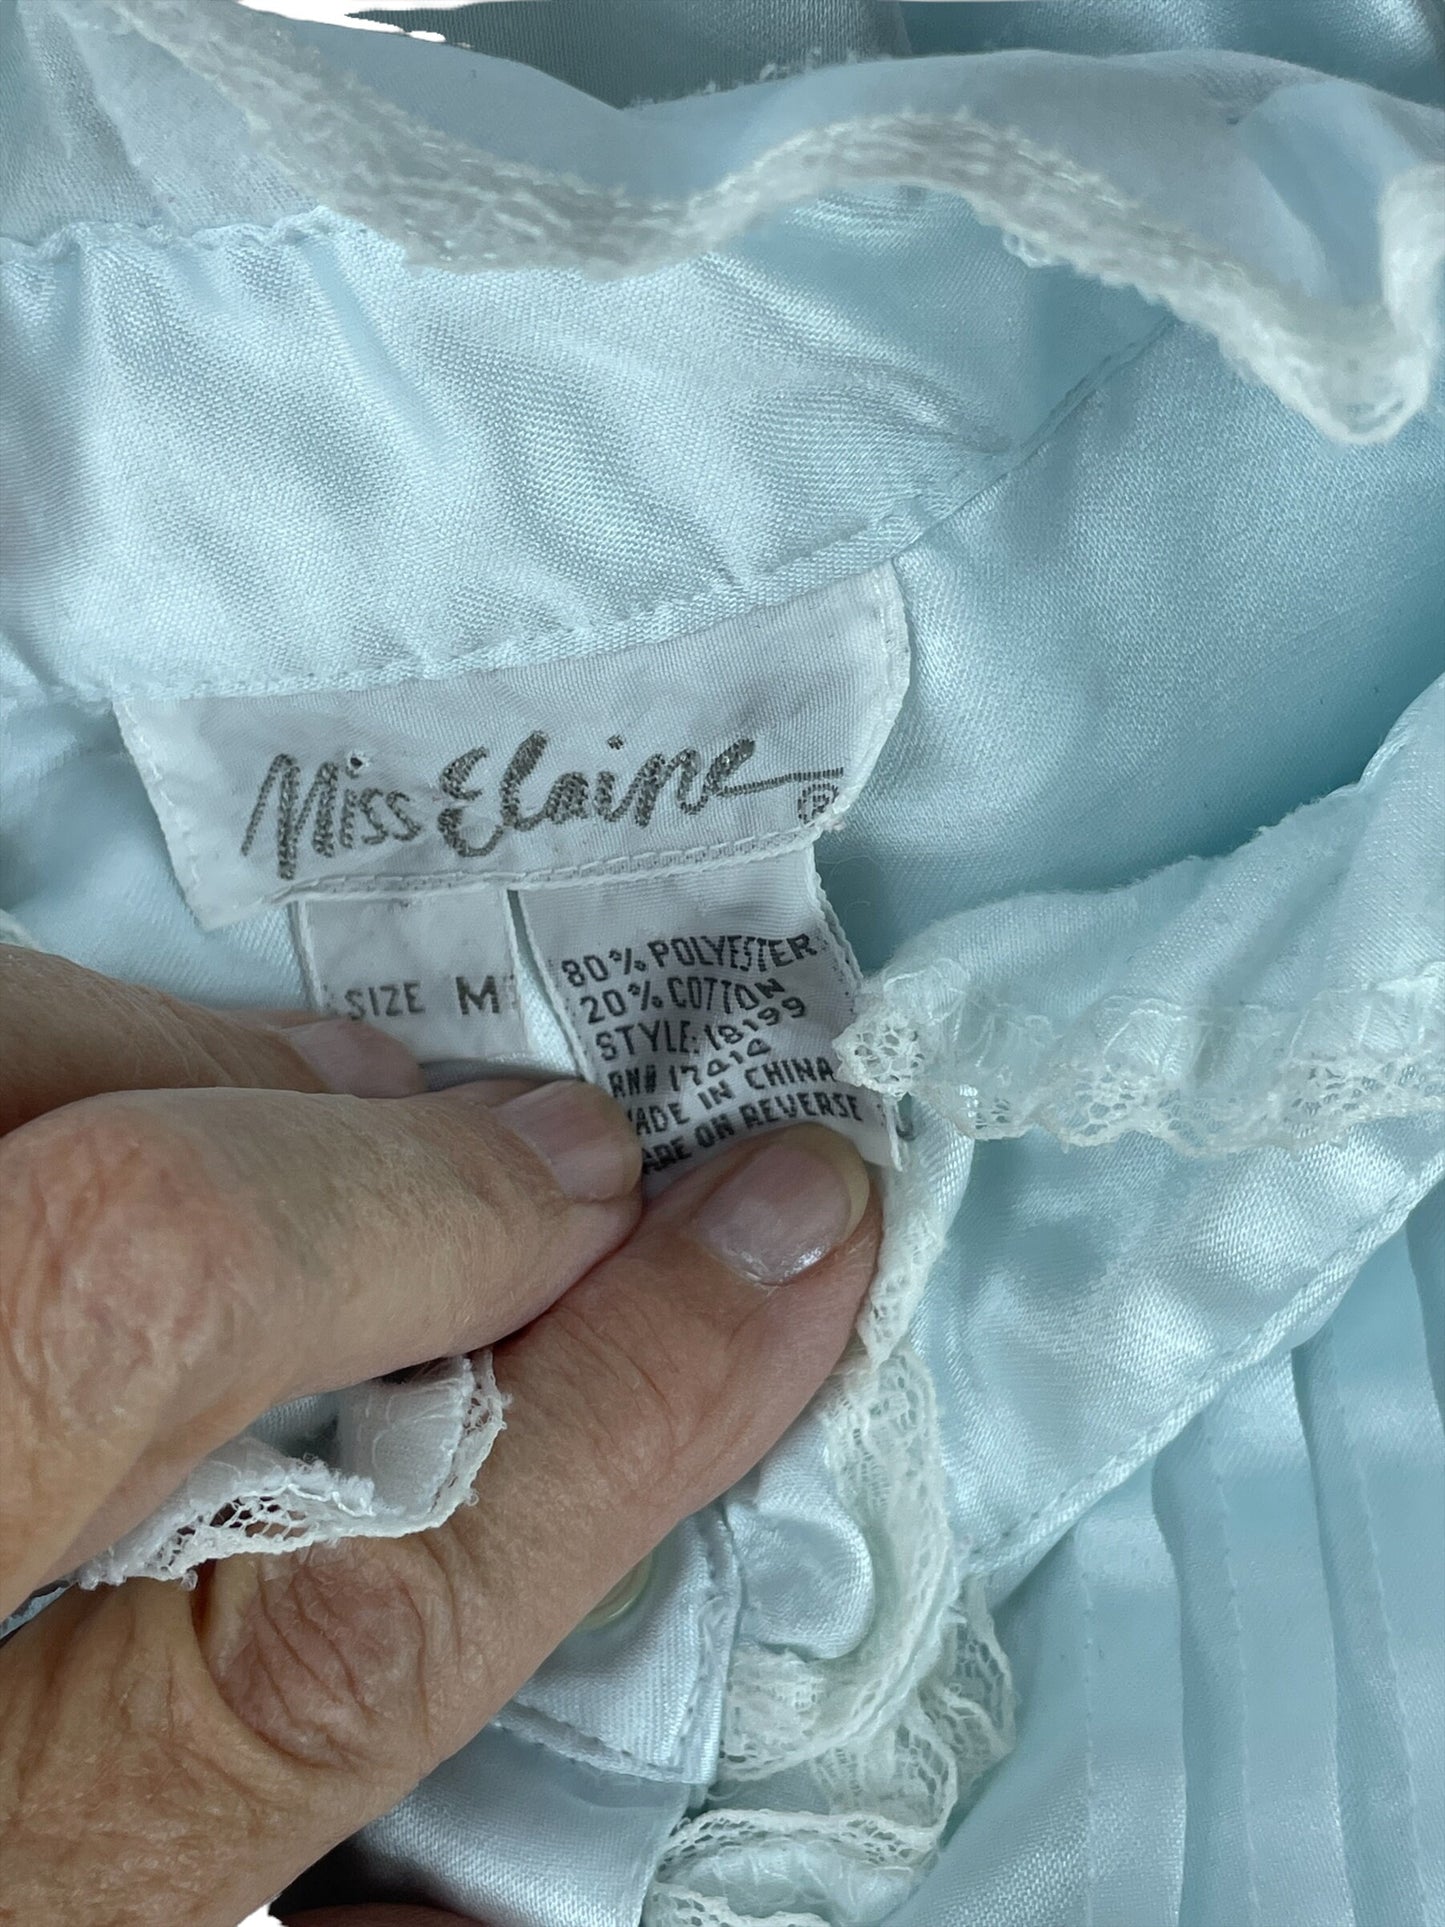 1980s flannel backed blue satin nightgown by Miss Elaine Size M